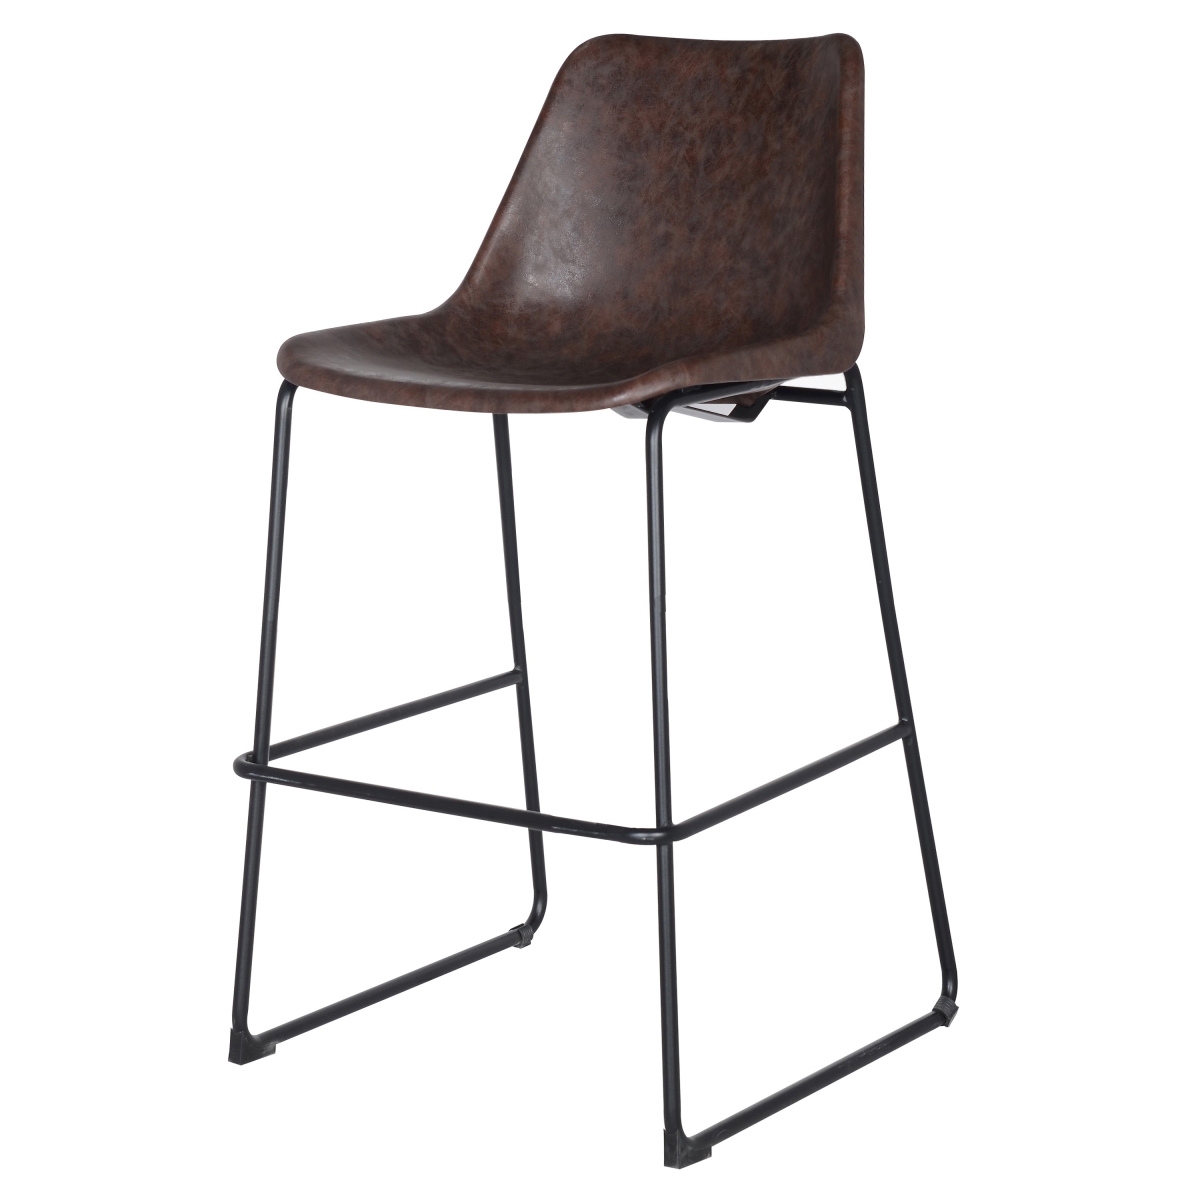 9300022-238 Delta Polyurethane Leather Abs Counter Stool, Vintage Coffee Brown